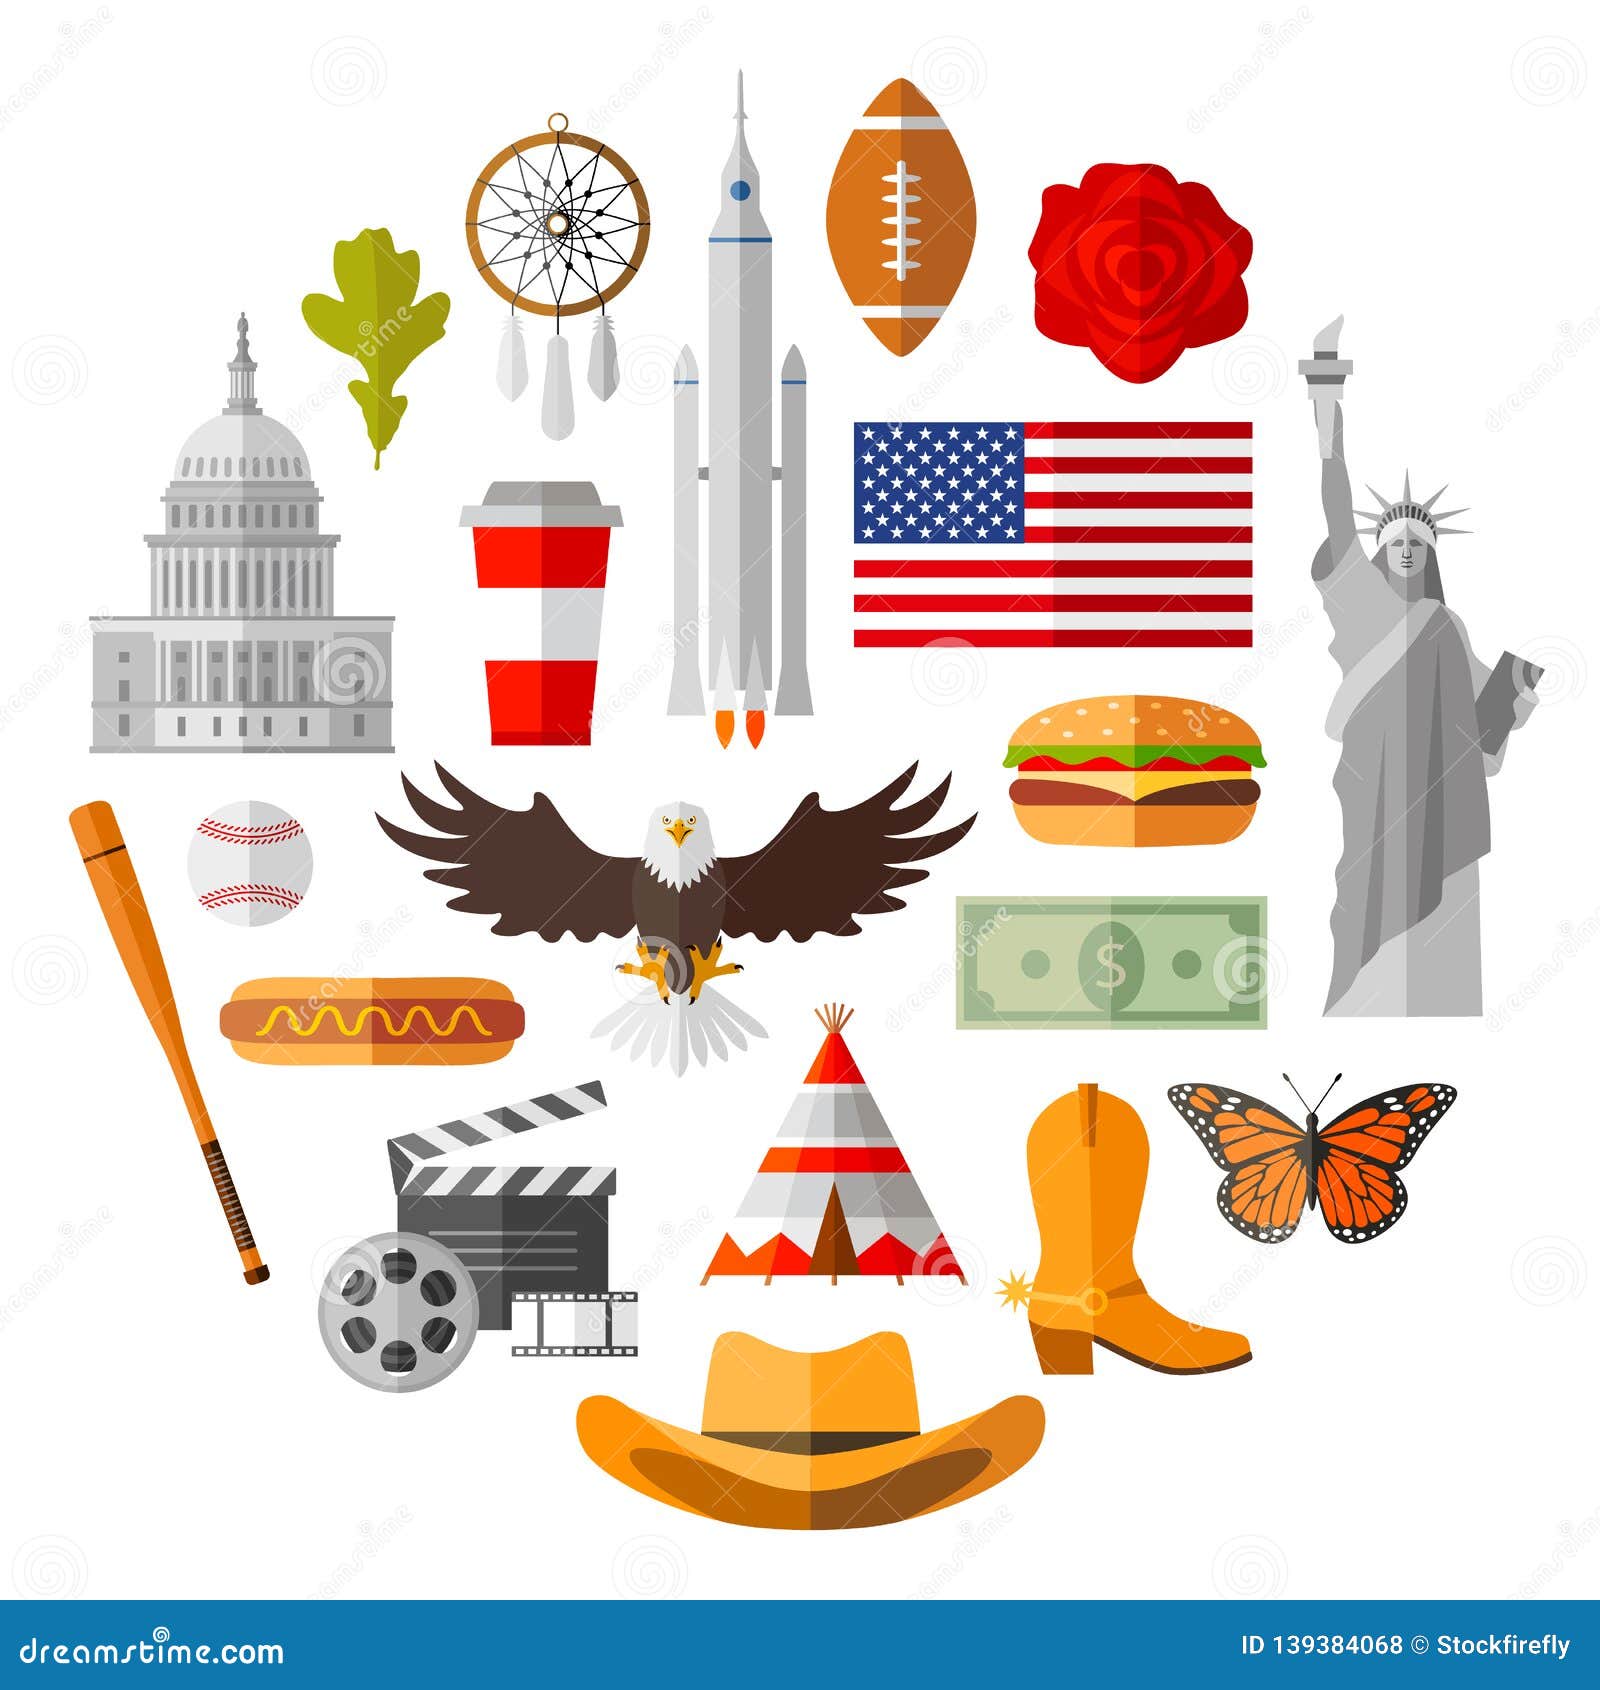 26 Best Ideas For Coloring American Symbols